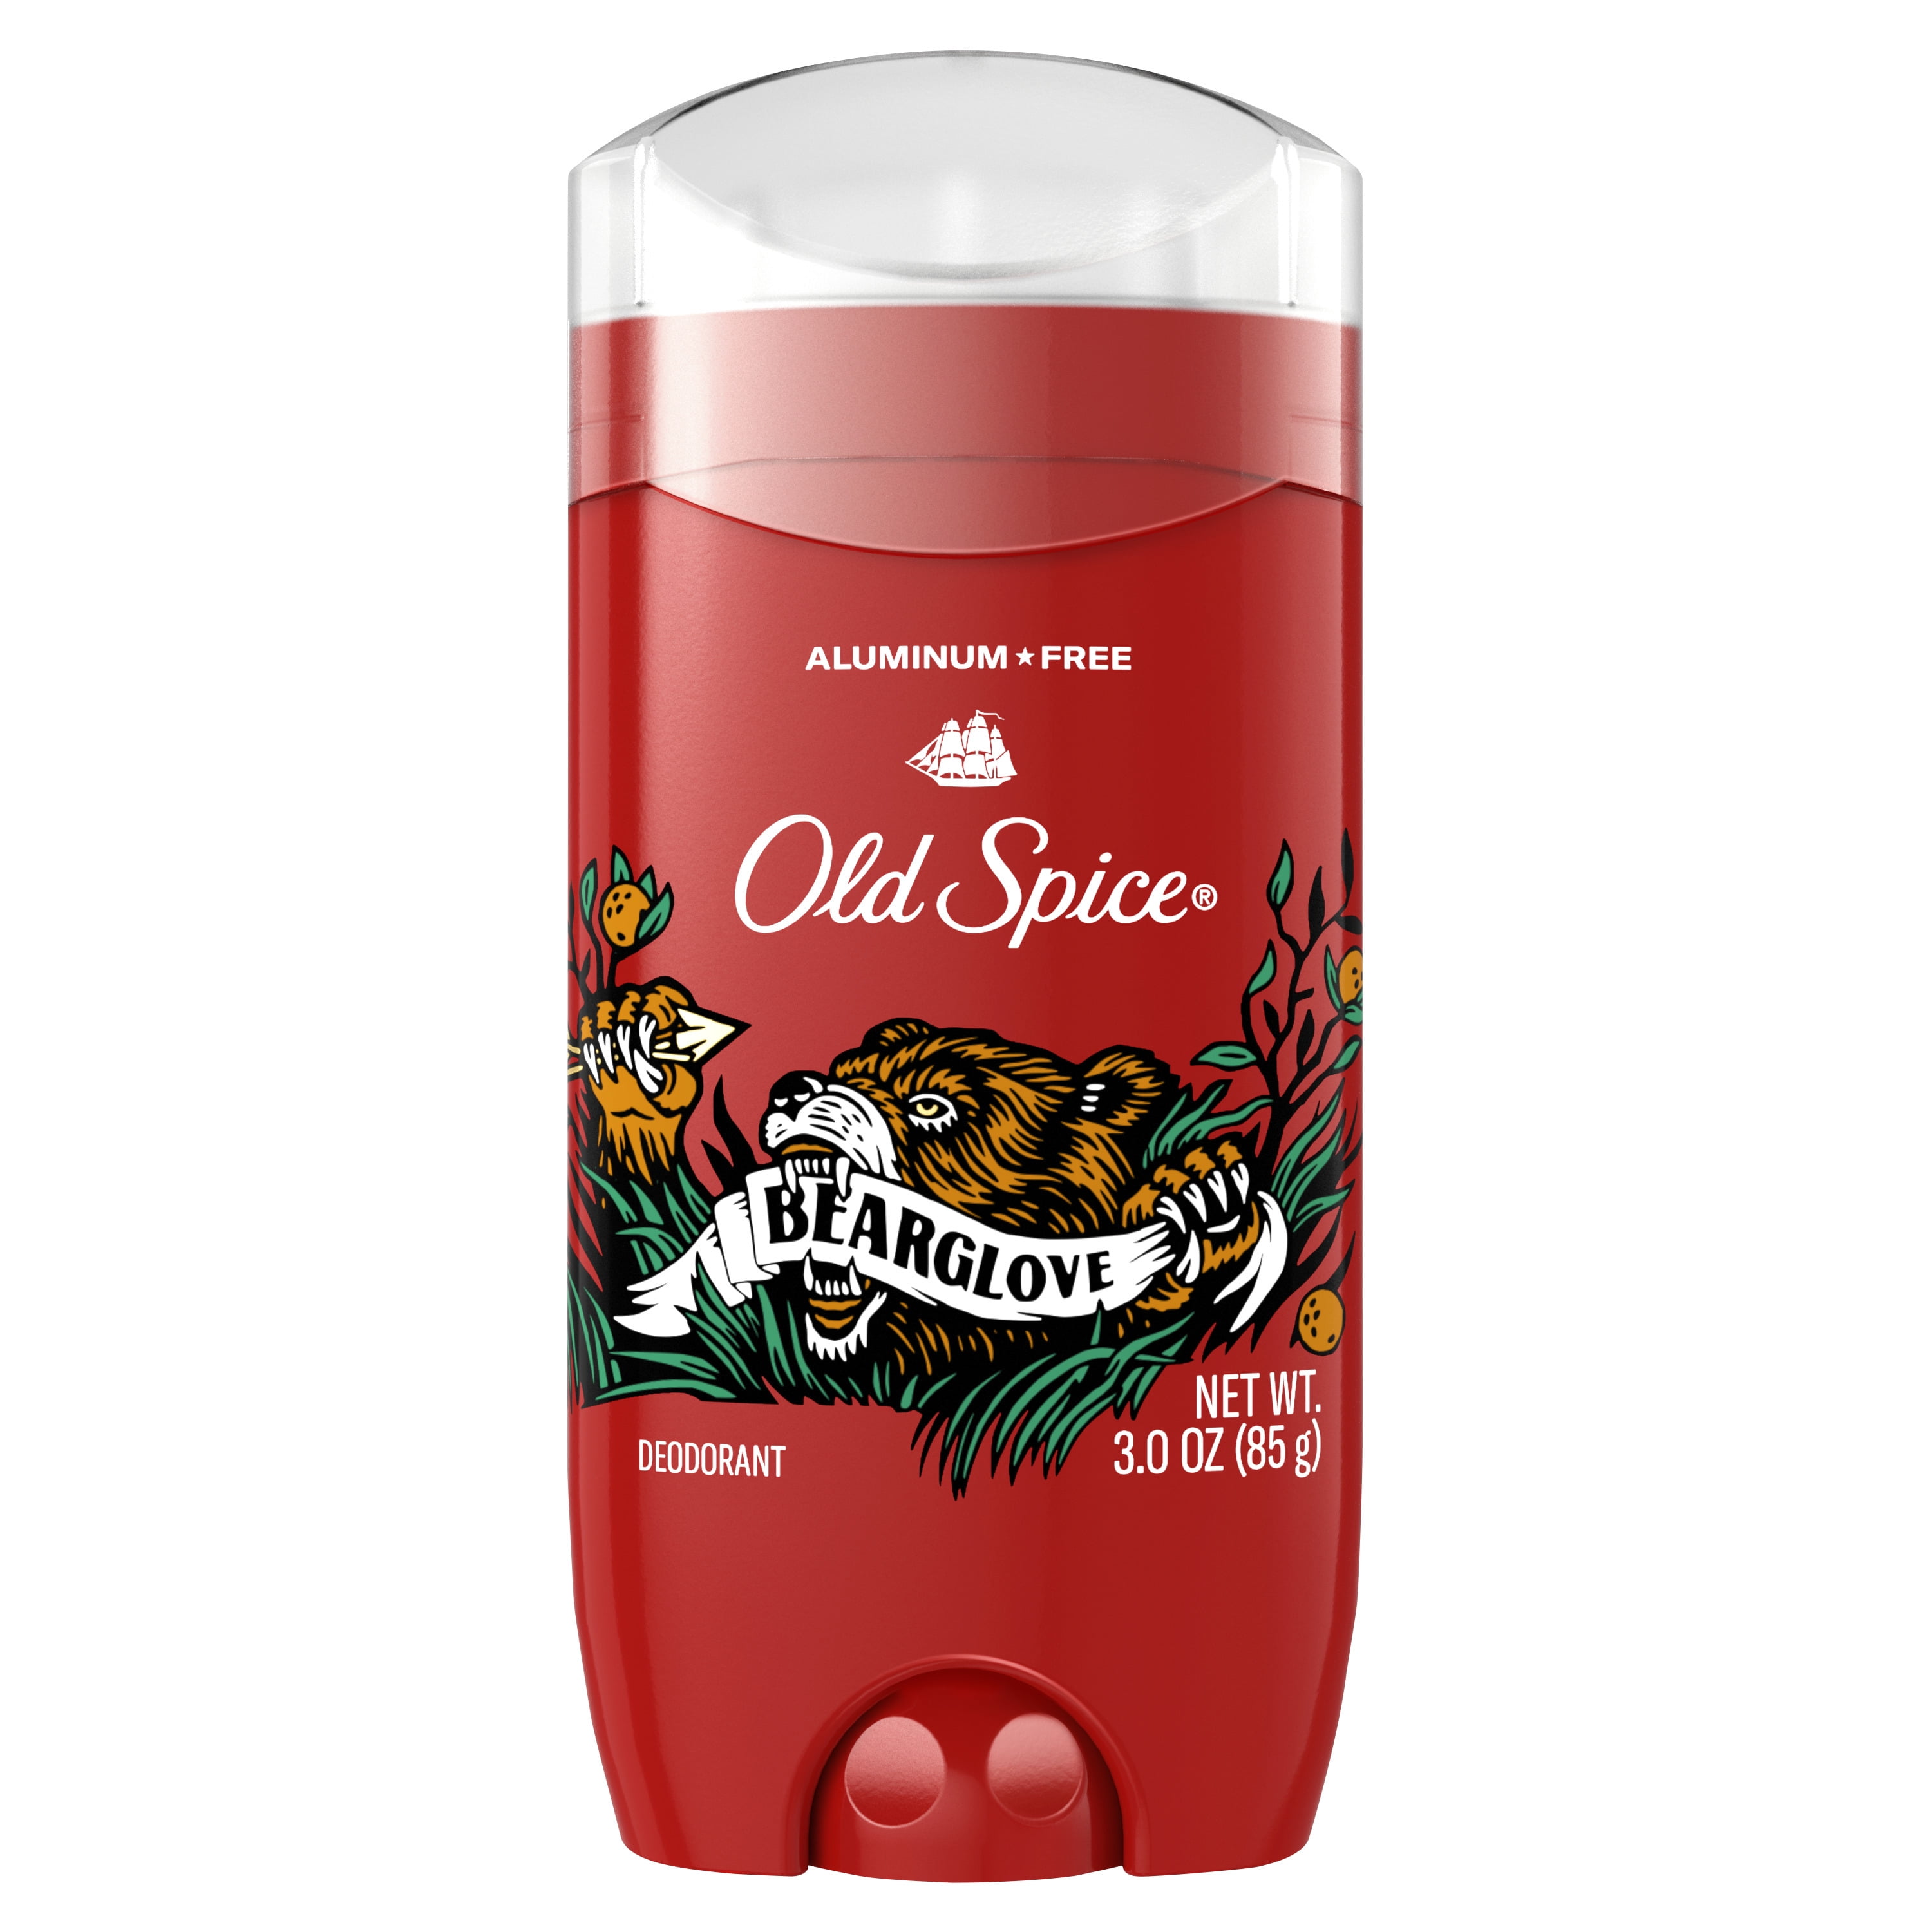 Old Spice Aluminum Free Deodorant for Men, Bearglove, 48 Hr. Protection, 3.0 oz